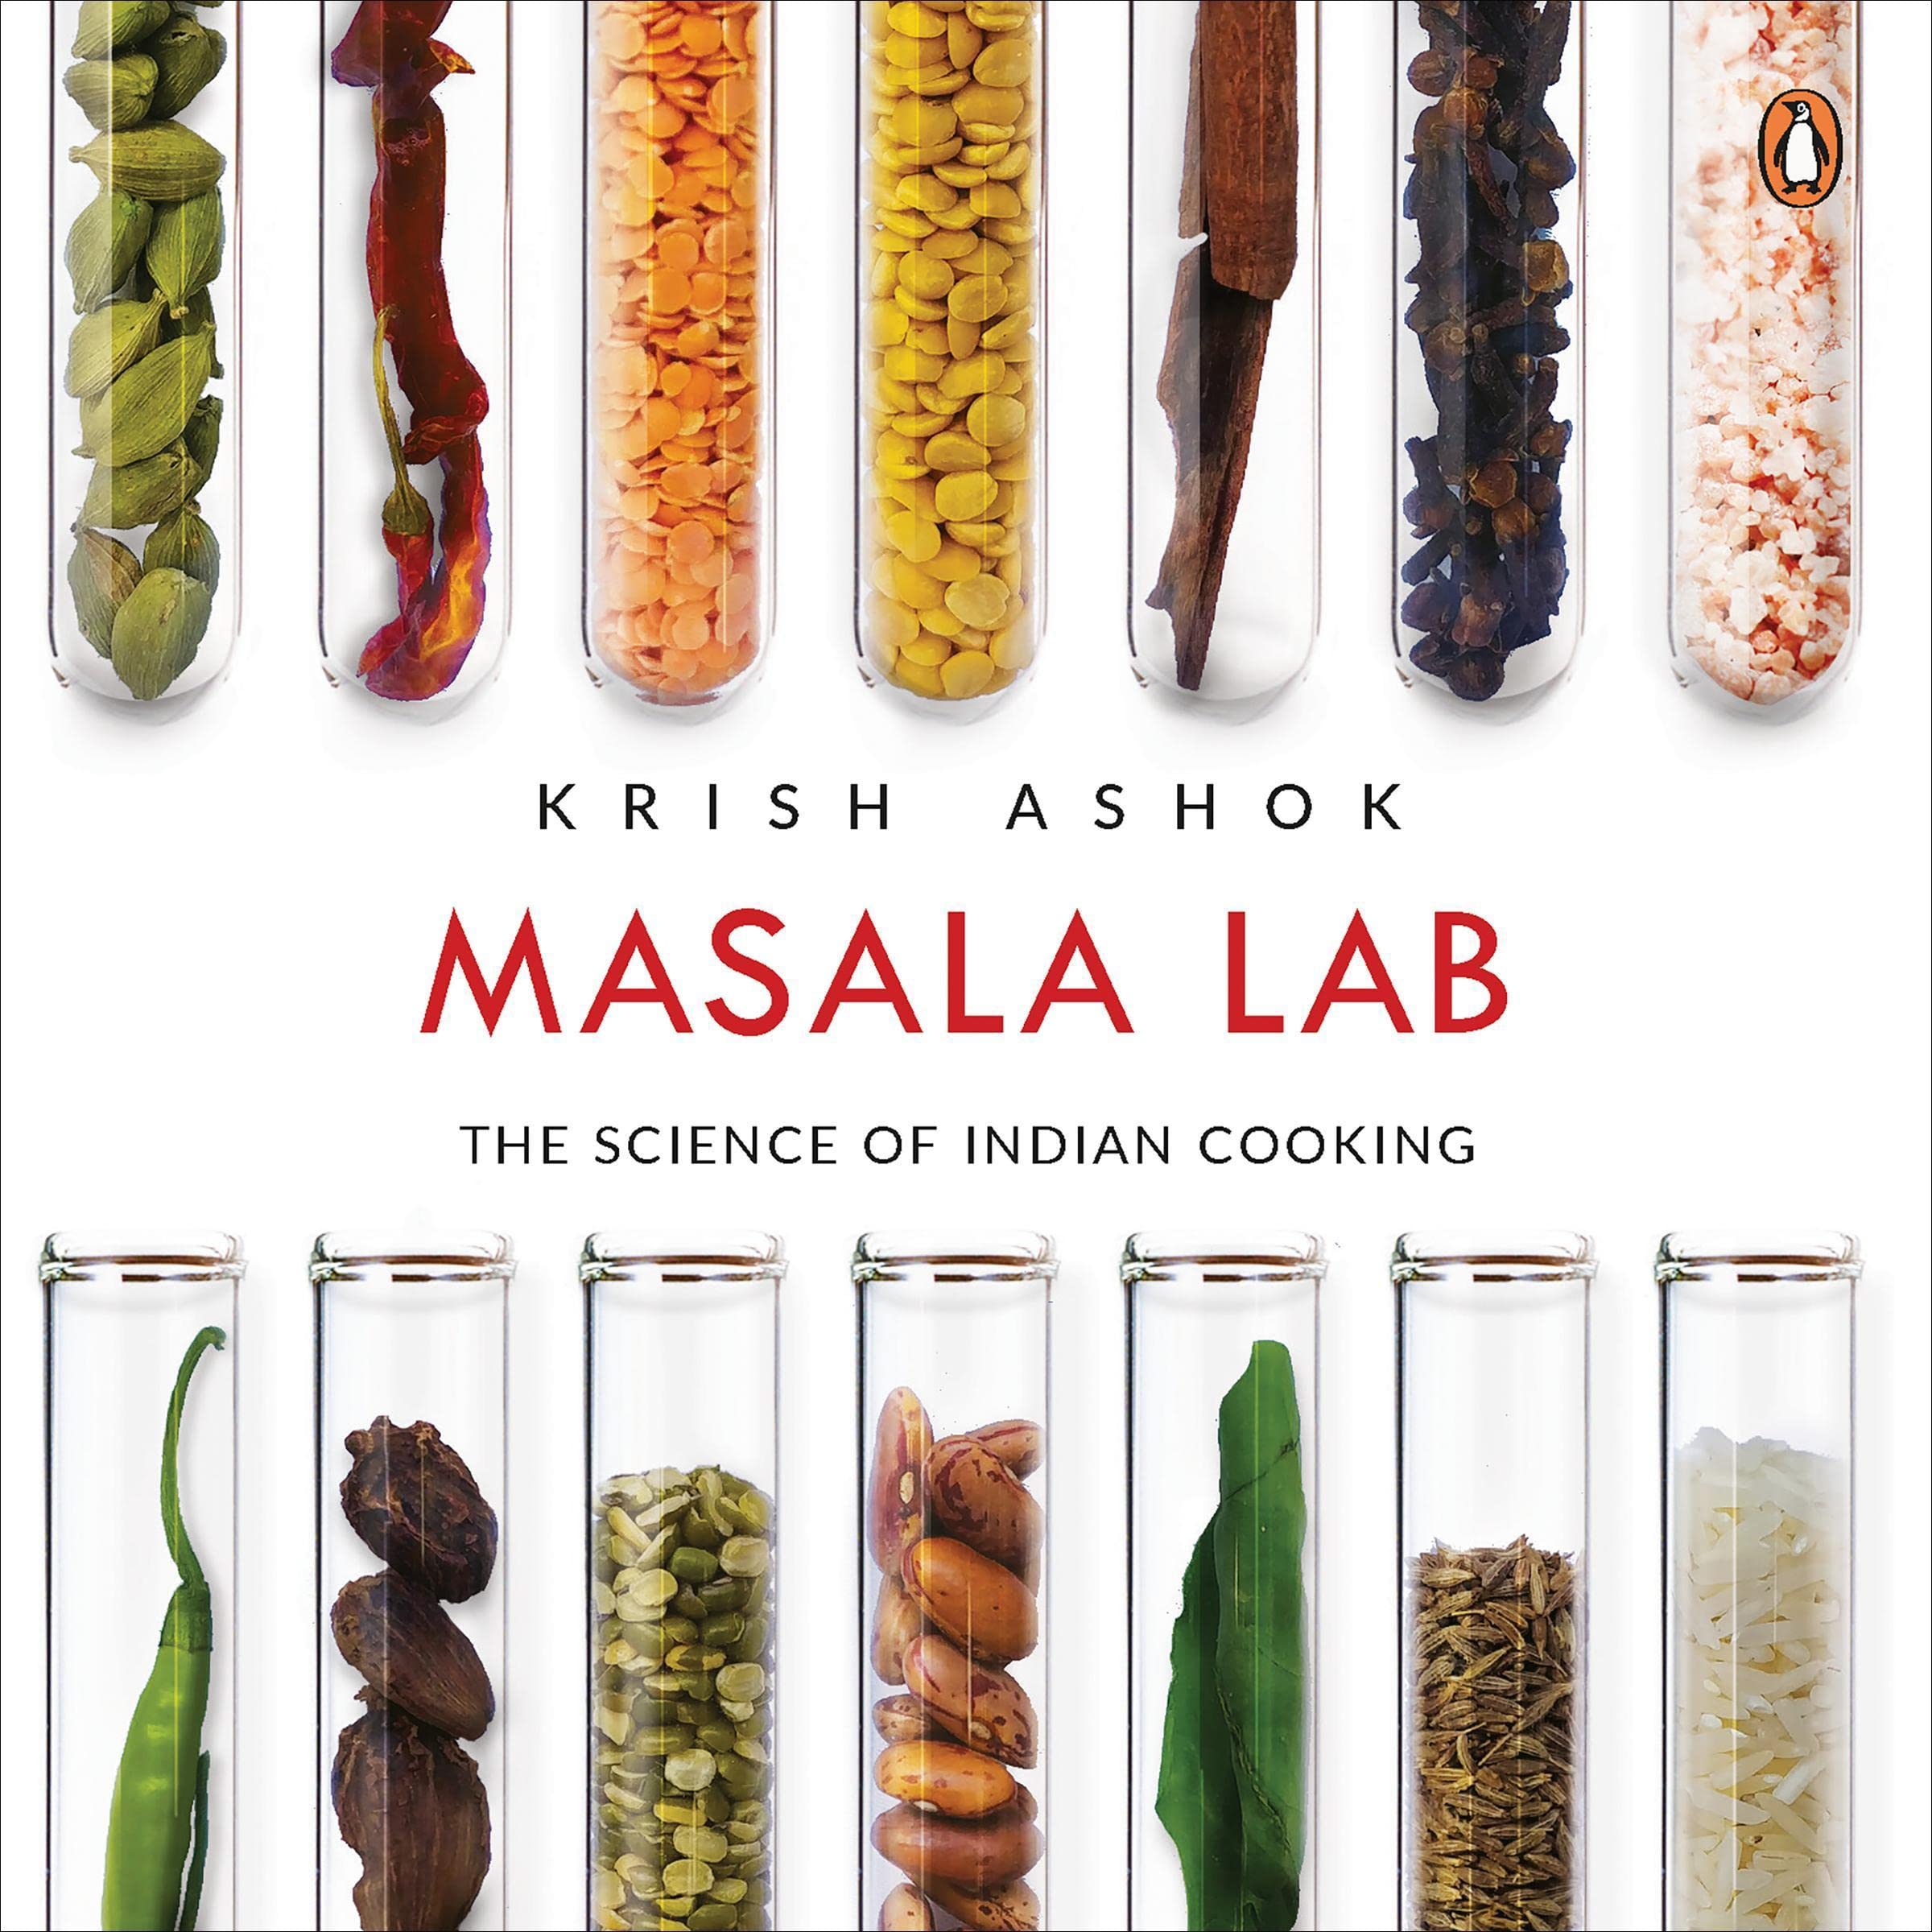 Masala Lab: The Science of Indian Cooking